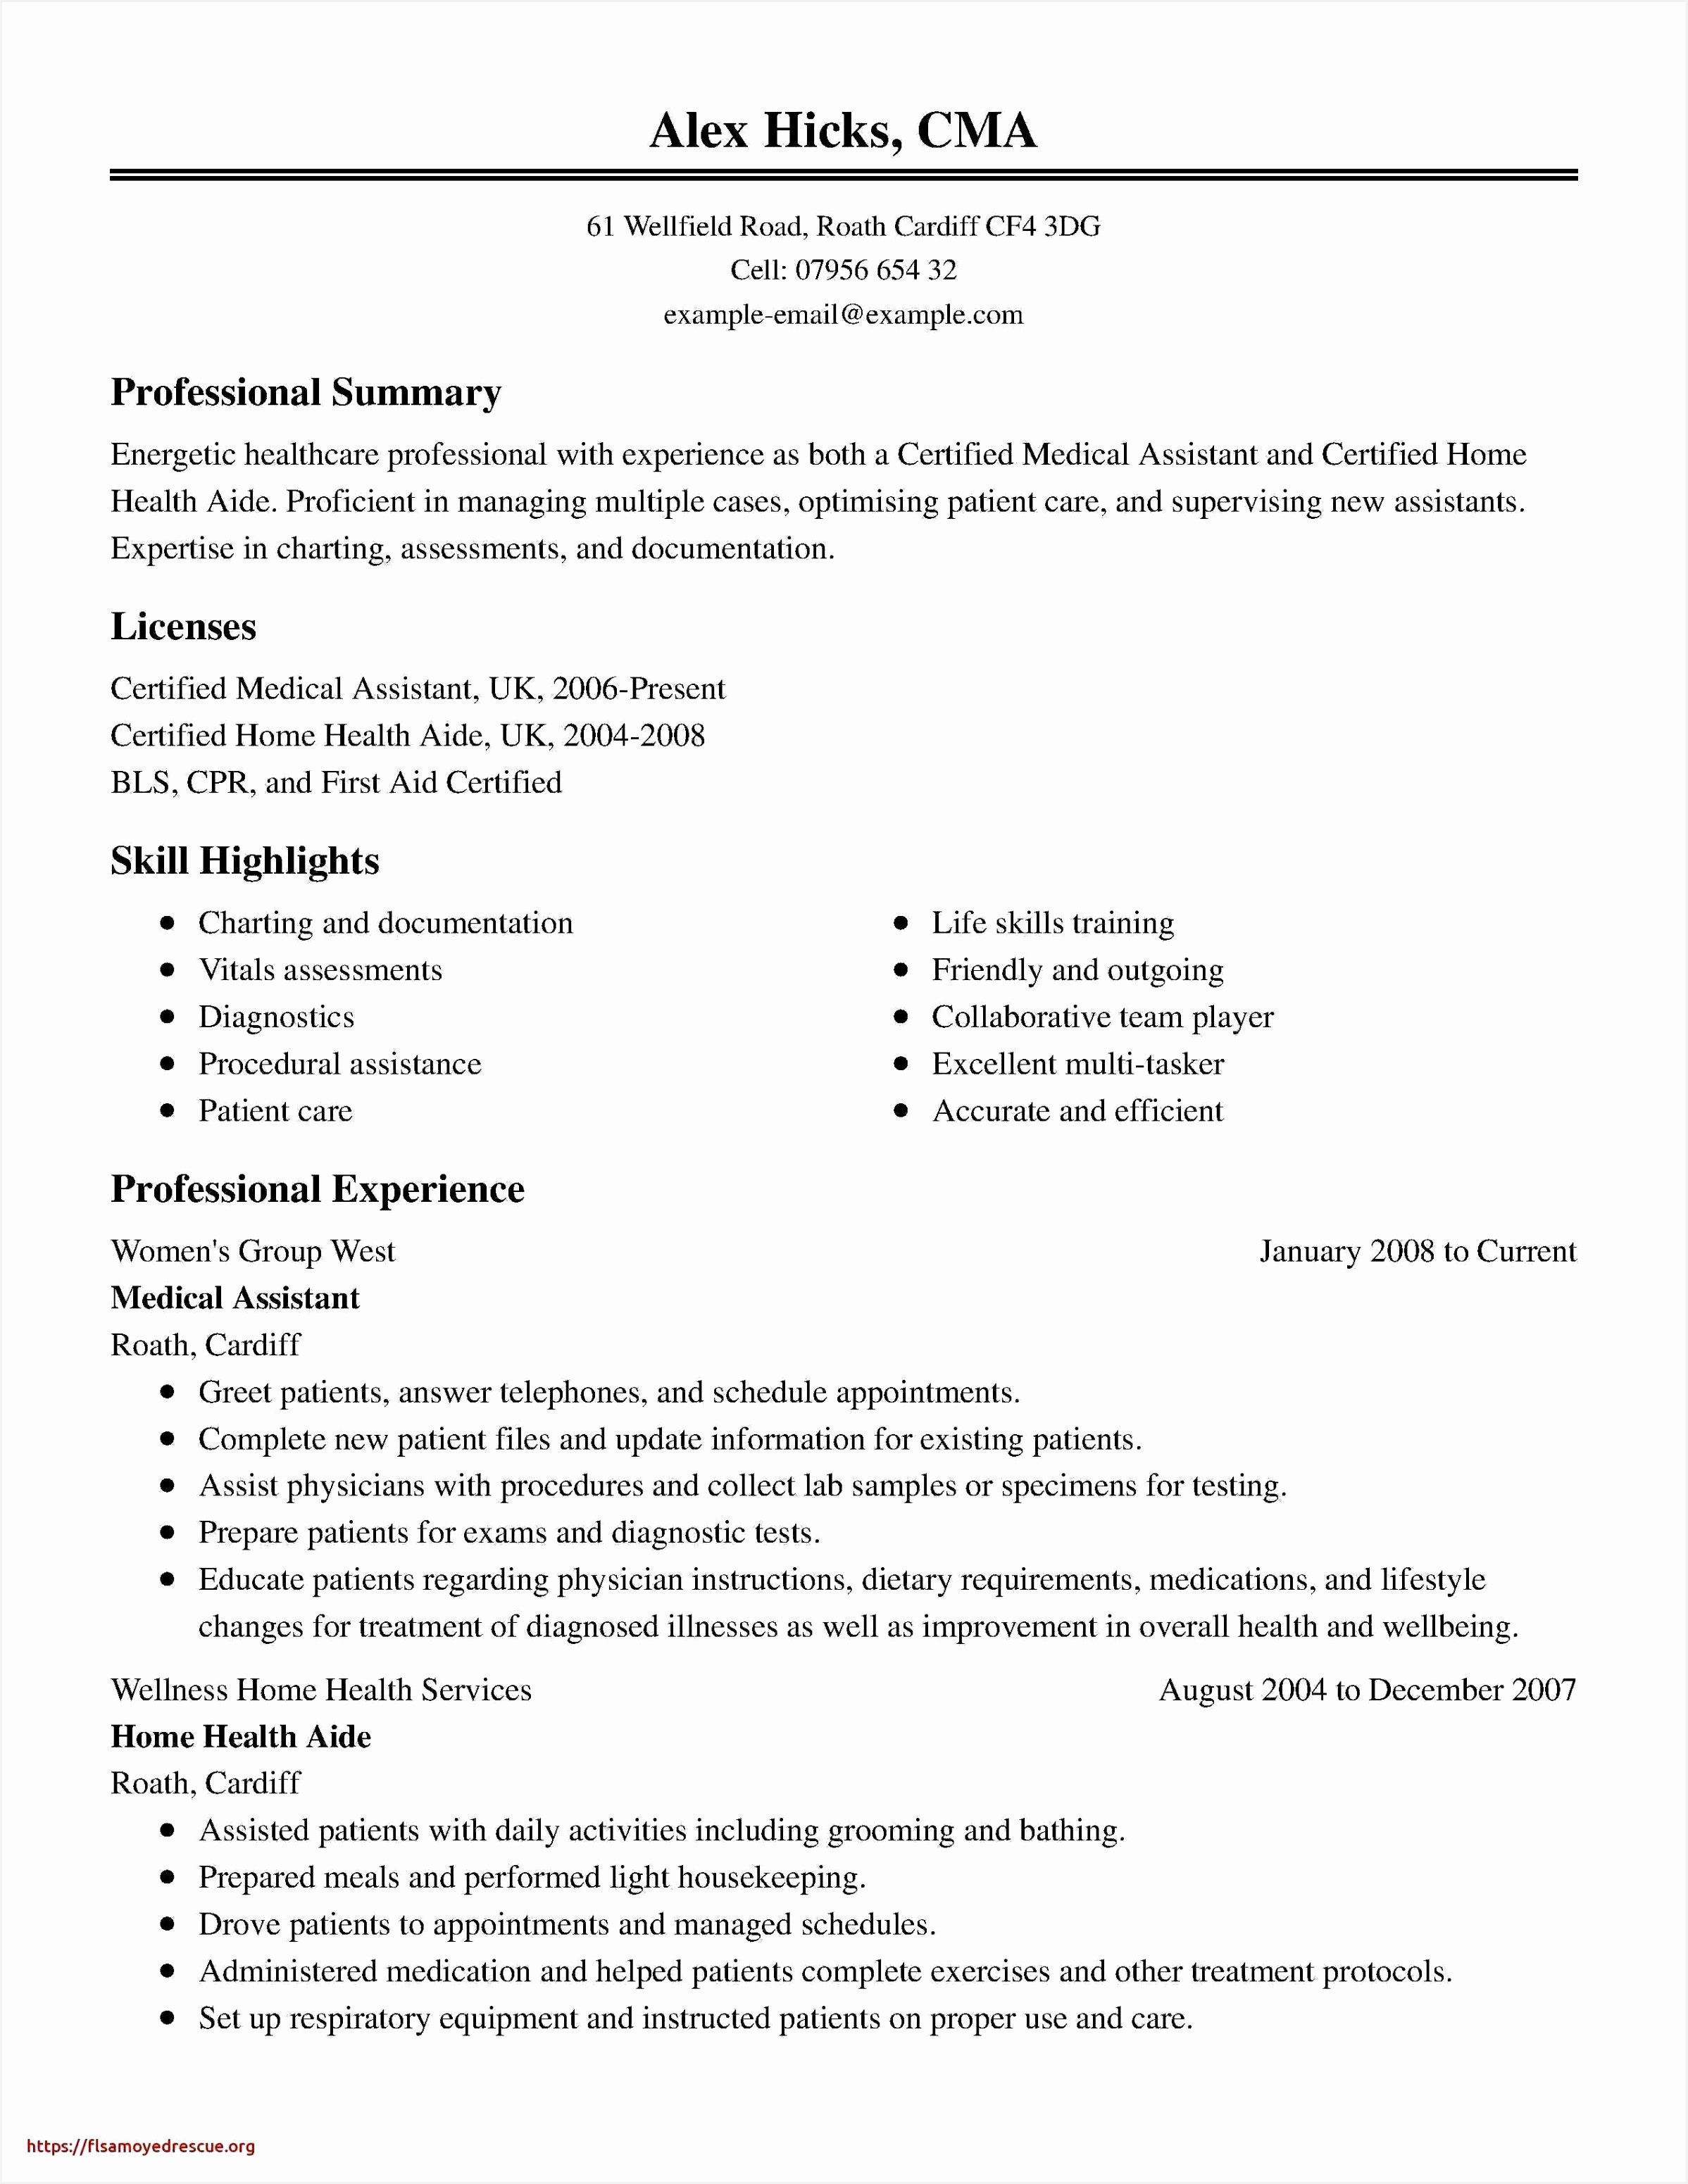 Resume Samples References New How To Write References A Resume Free Download Resume Examples 0d 310223977mtfb